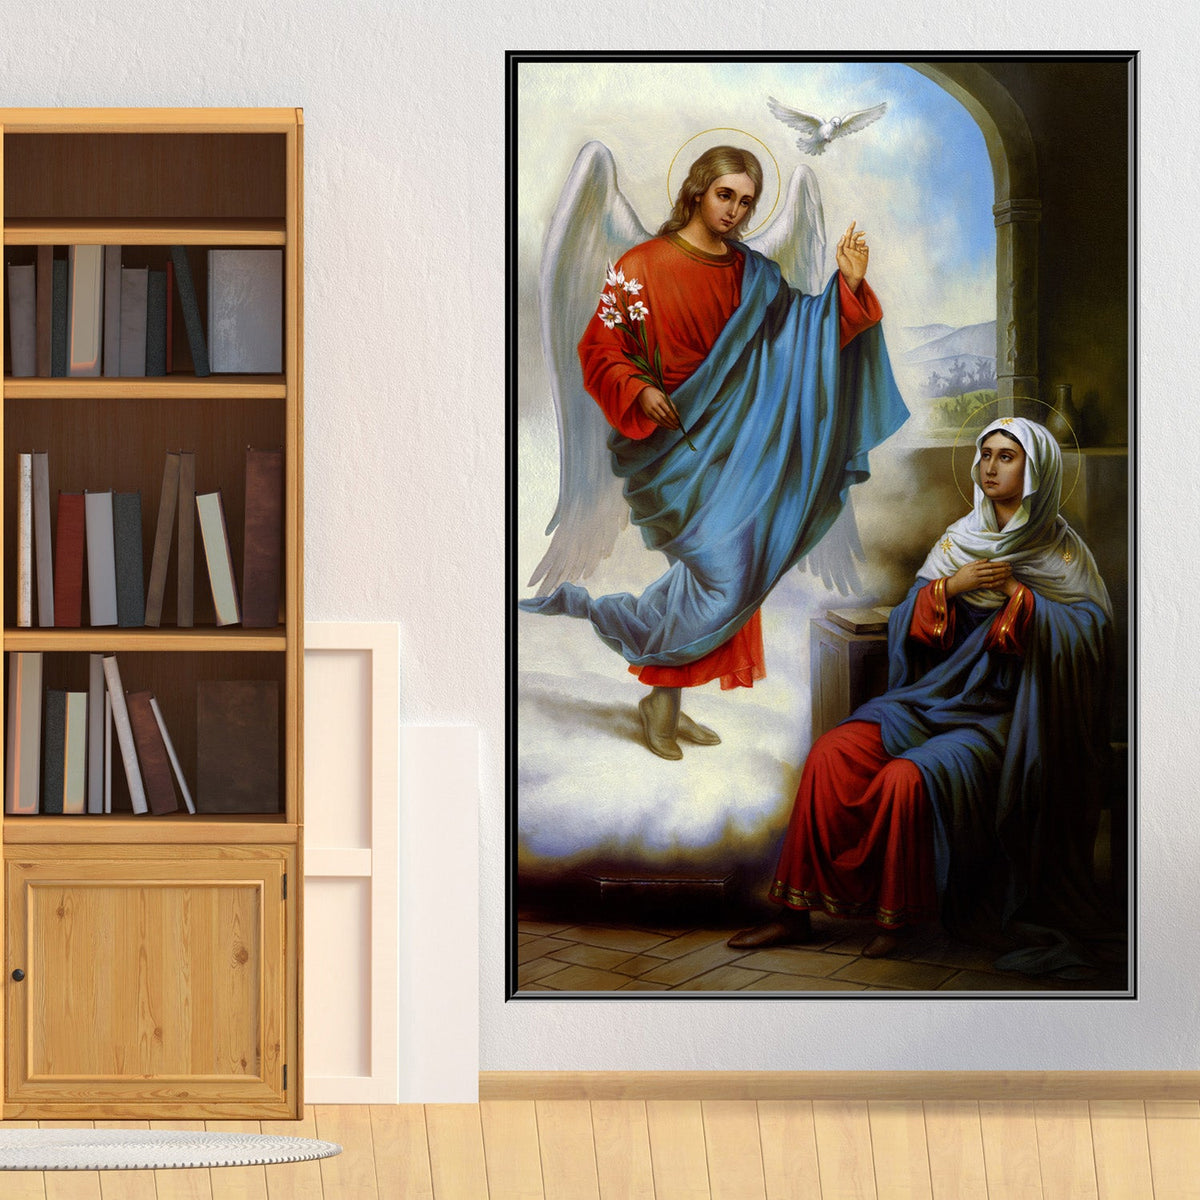 https://cdn.shopify.com/s/files/1/0387/9986/8044/products/TheAnnunciationoftheBlessedMaryCanvasArtprintFloatingFrame-2.jpg